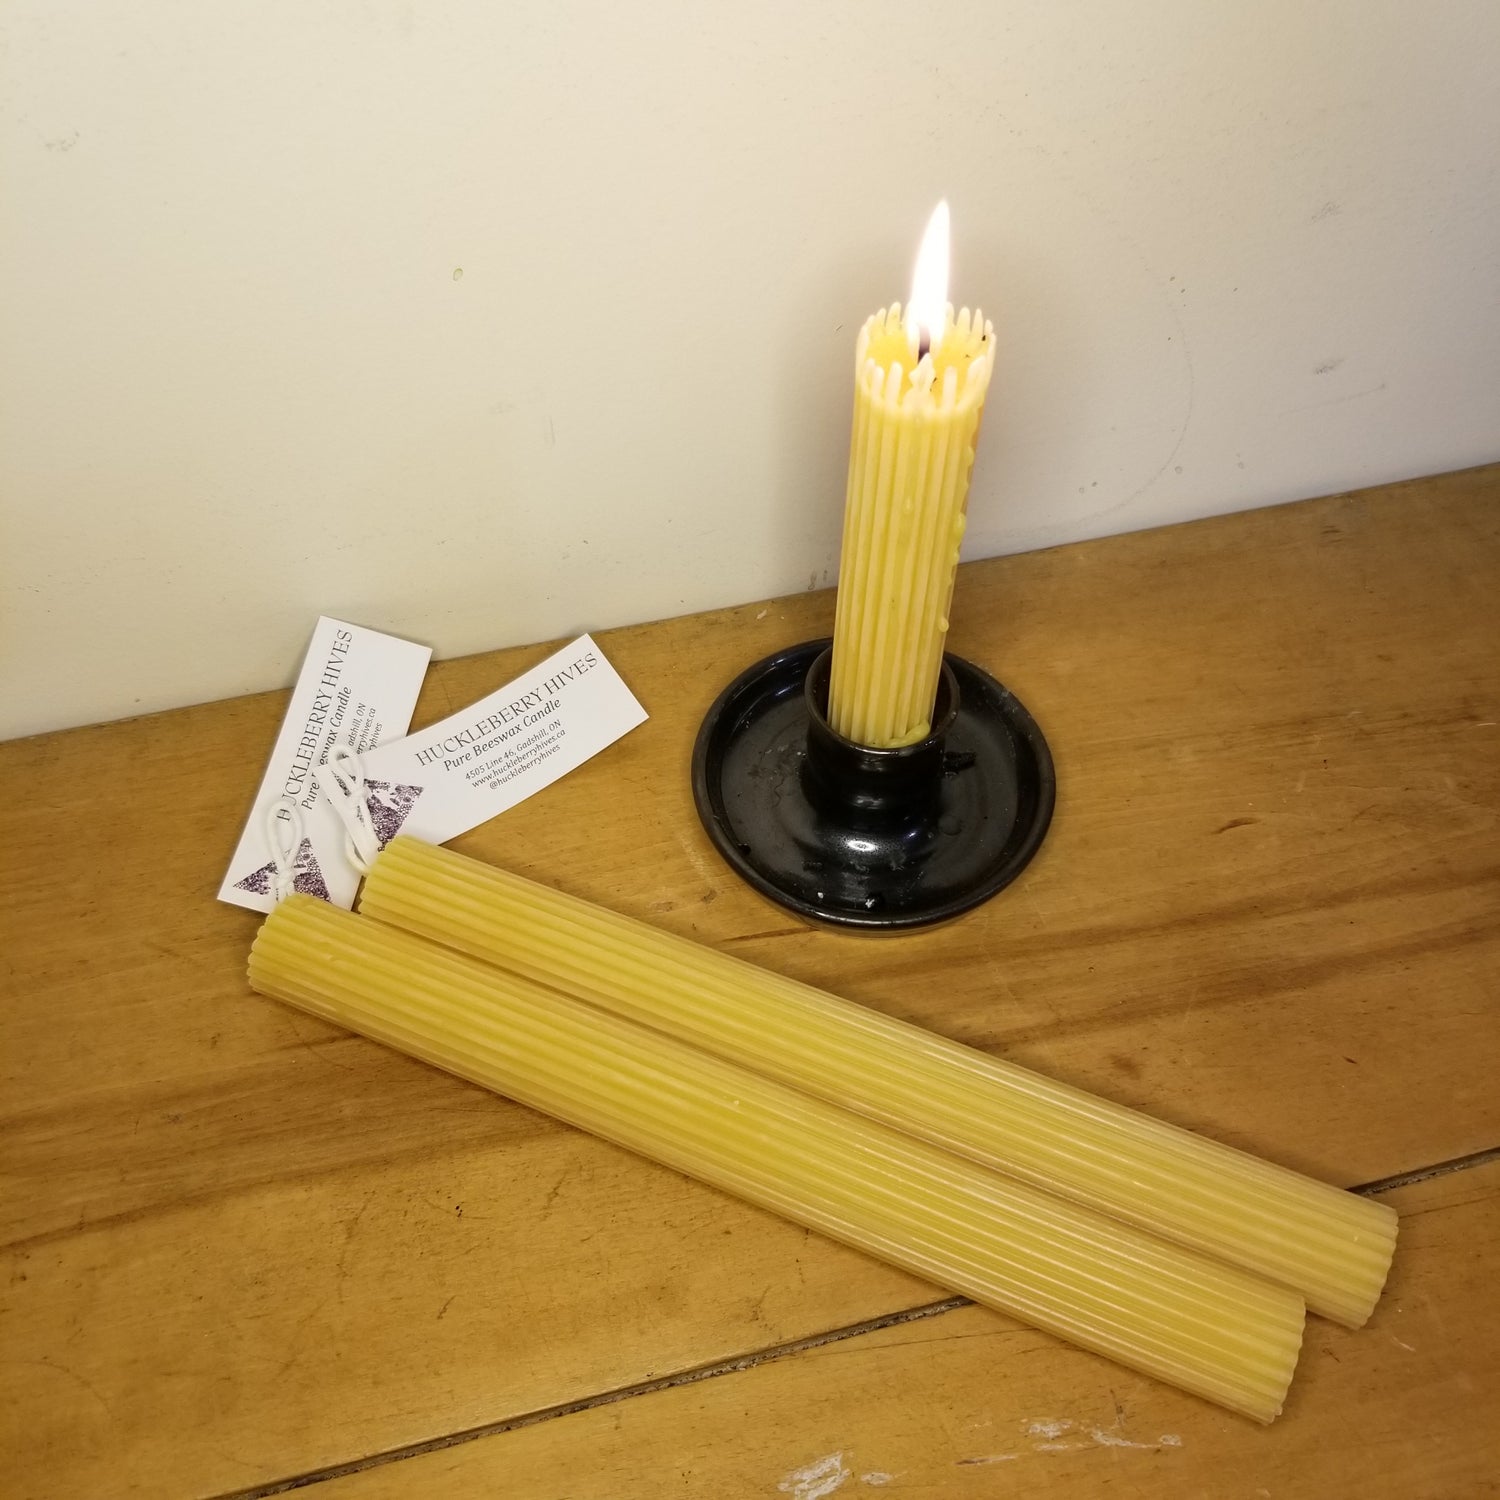 beeswax fluted taper candles lying beside a lit fluted taper in a black candle holder